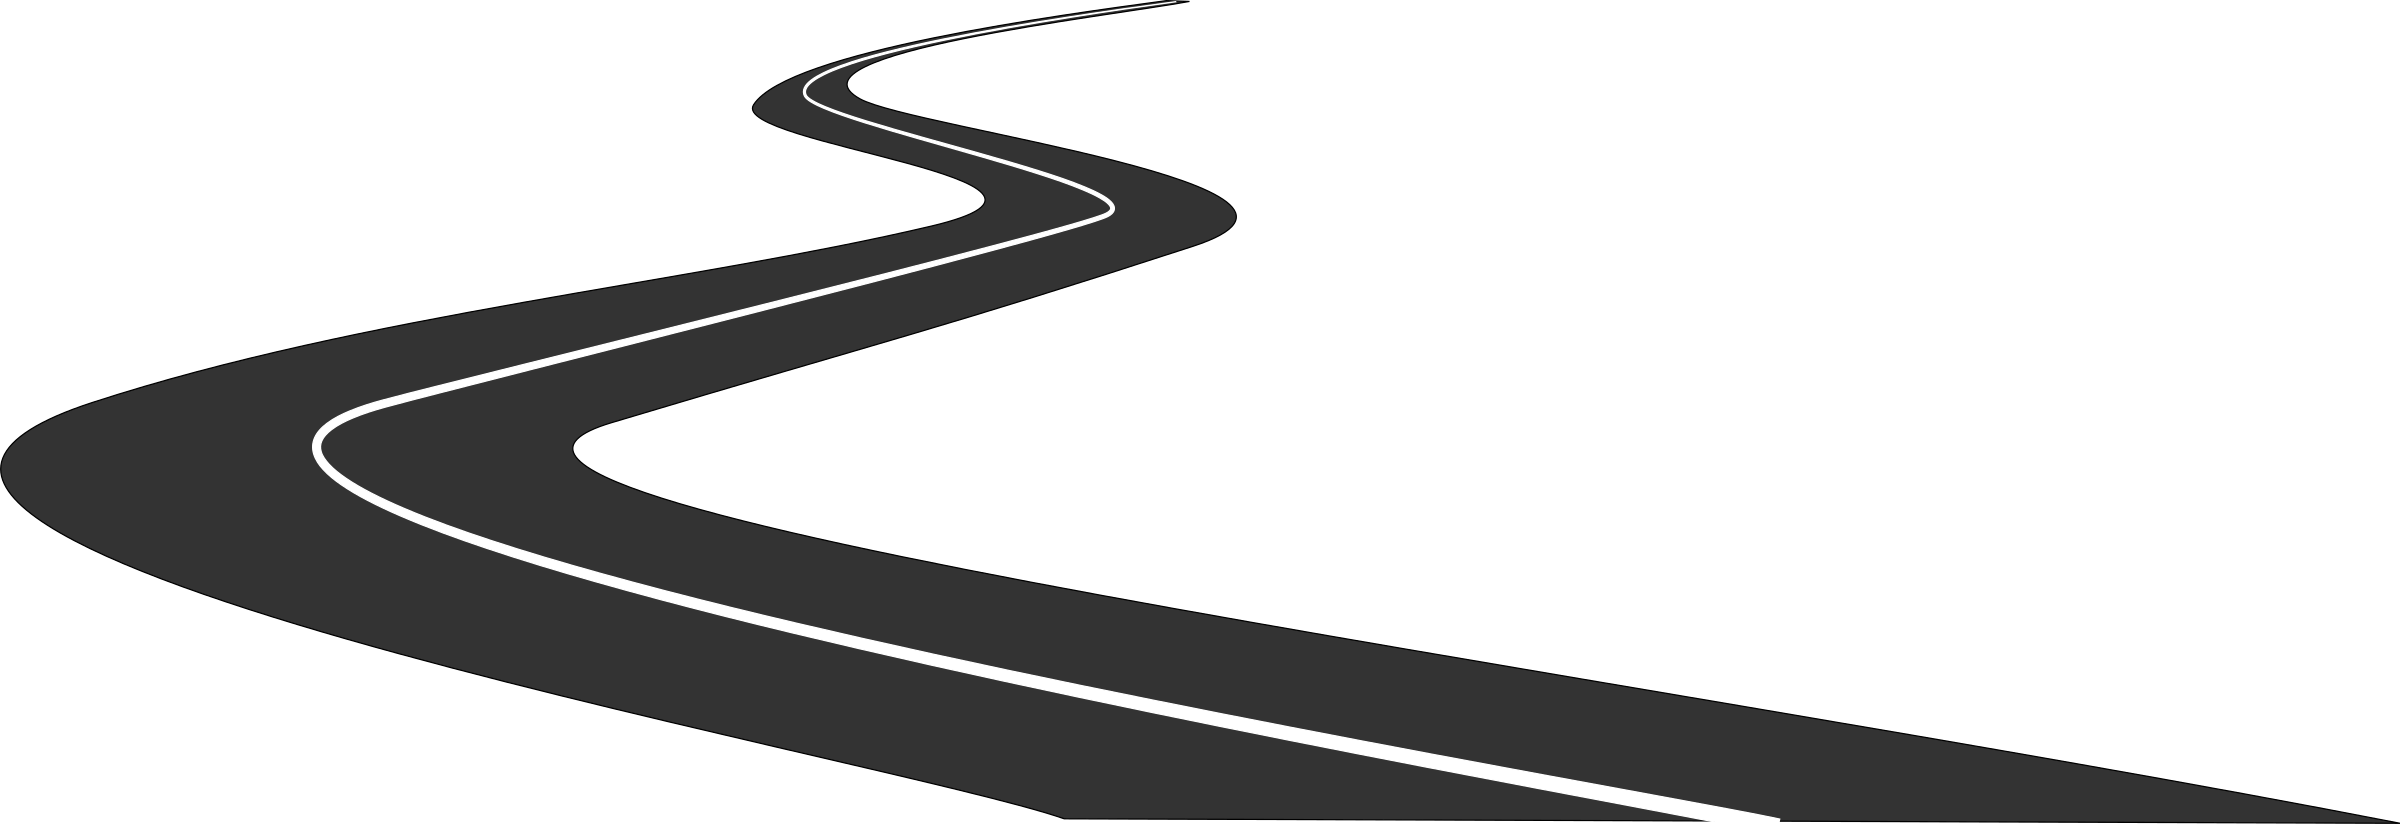 Road Png - Winding Road, Transparent background PNG HD thumbnail